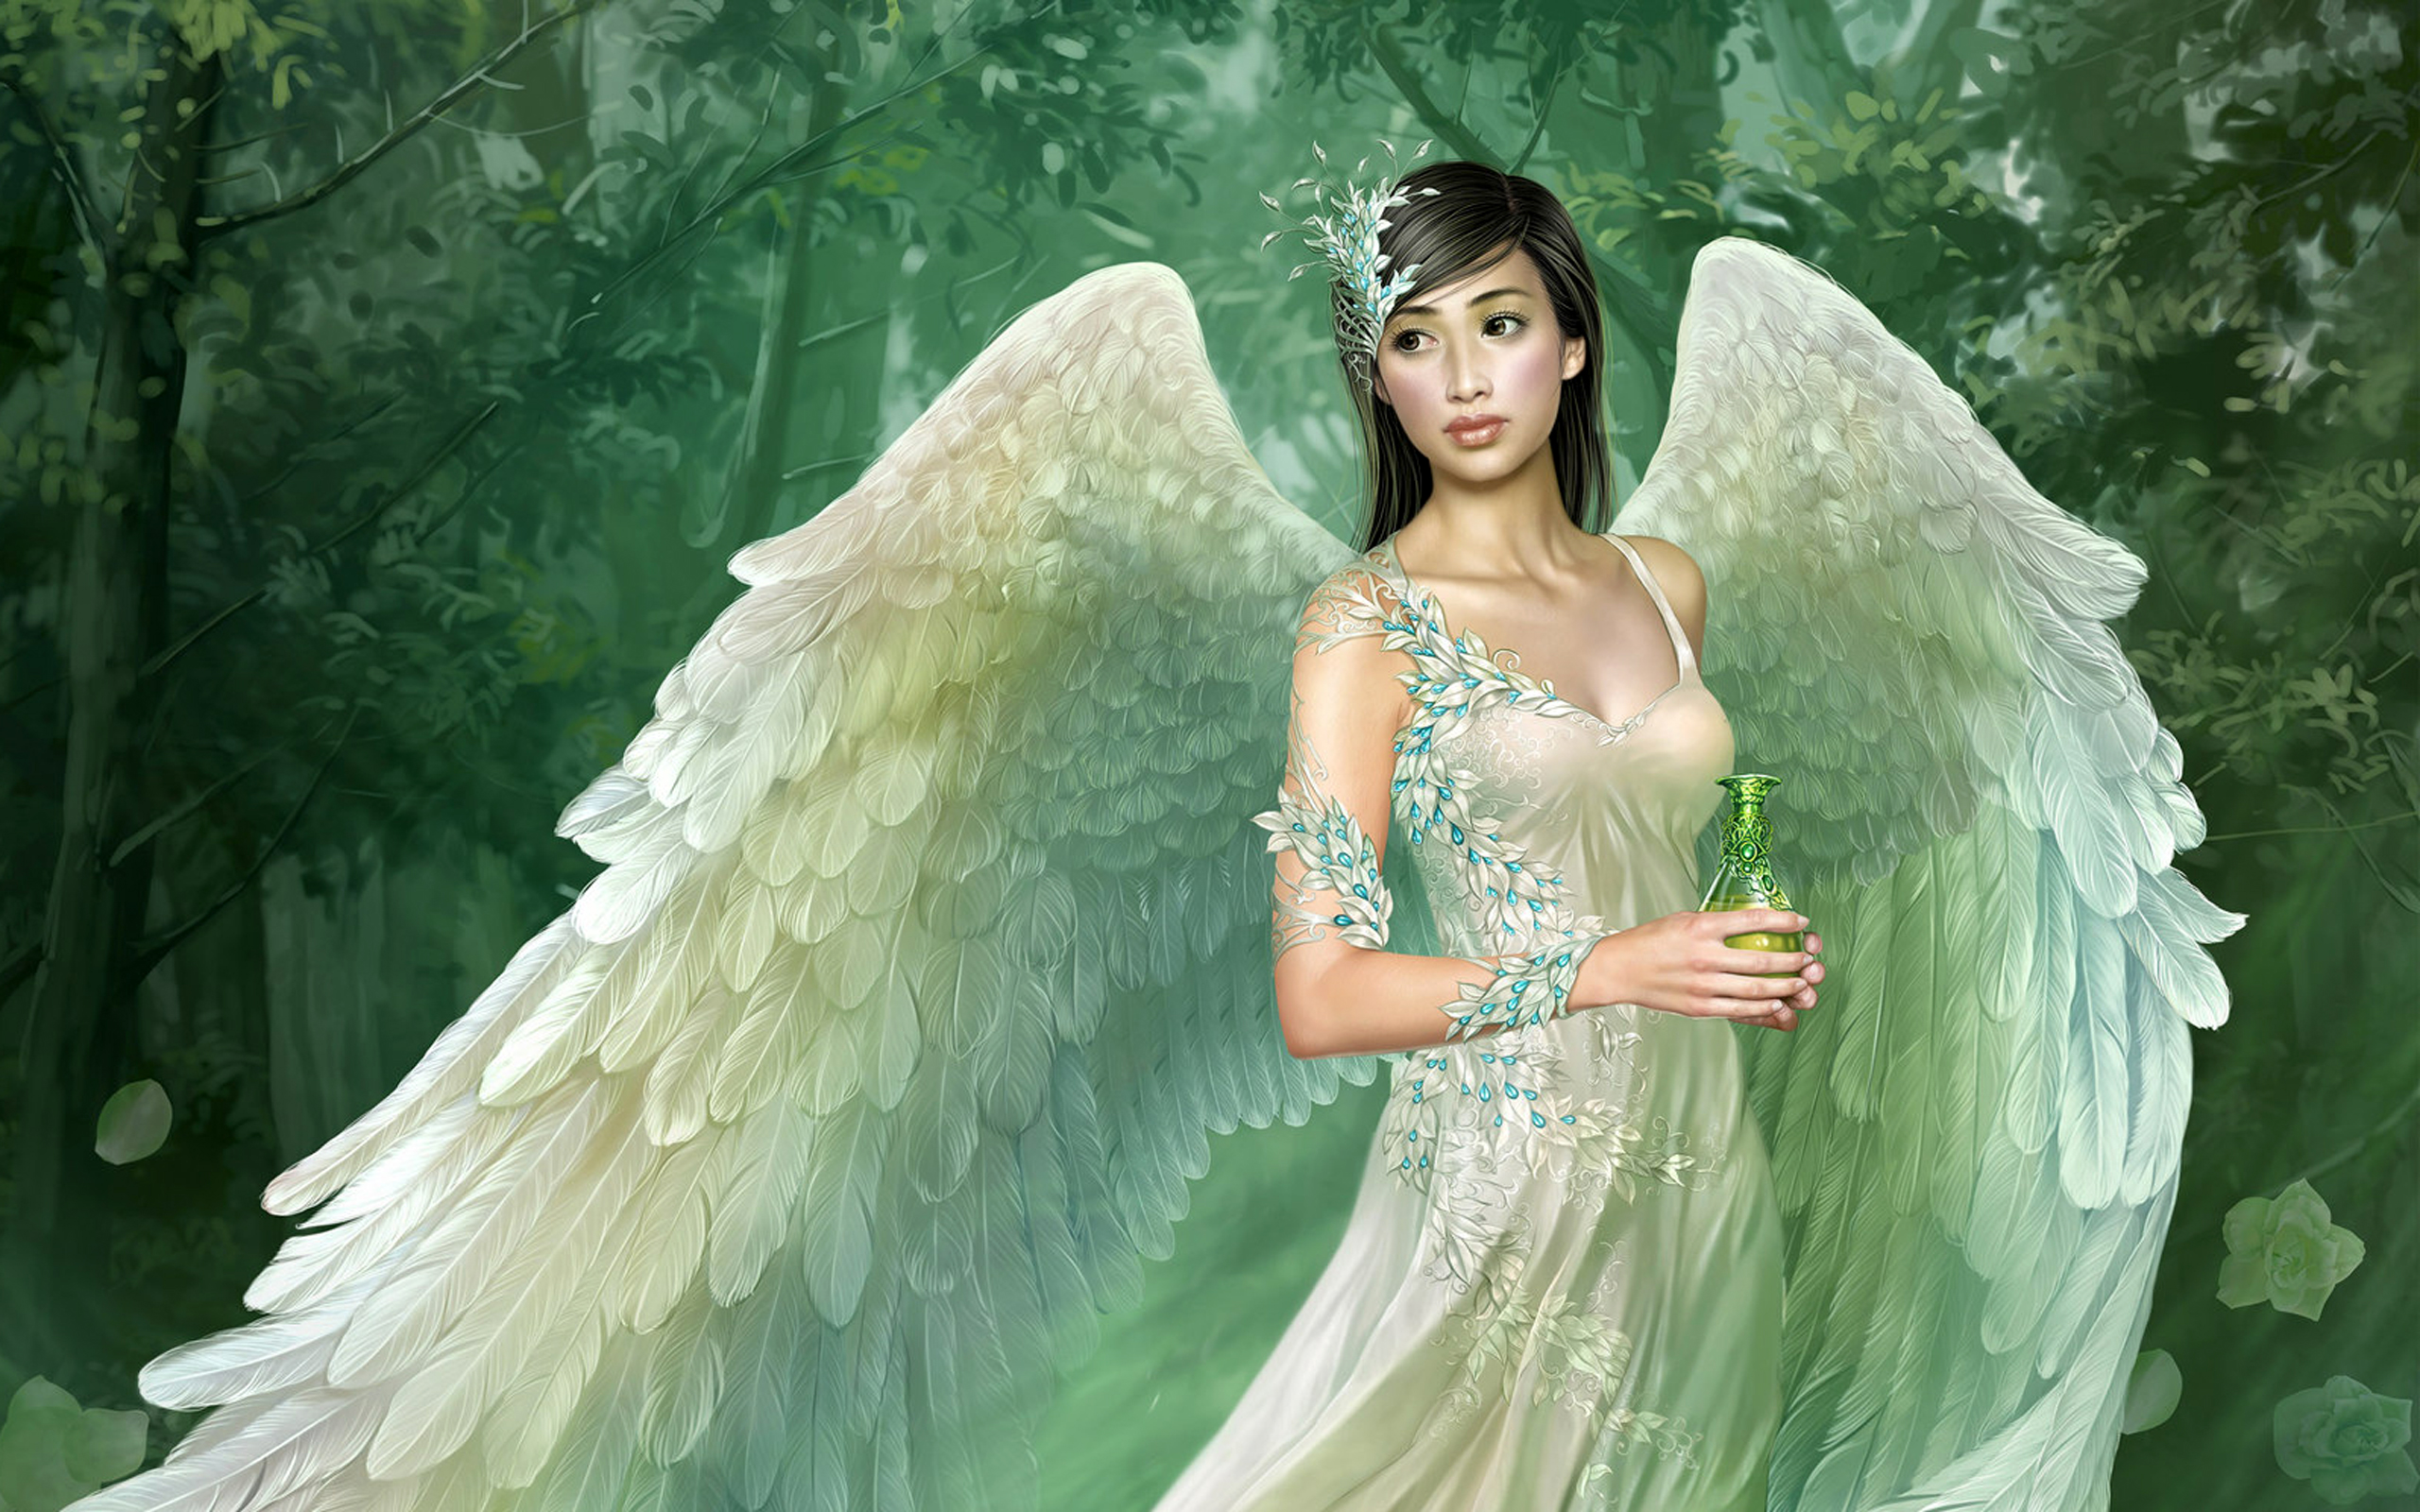 Fantasy artwork featuring an angel with majestic wings - Love Potion by Yuehui Tang.